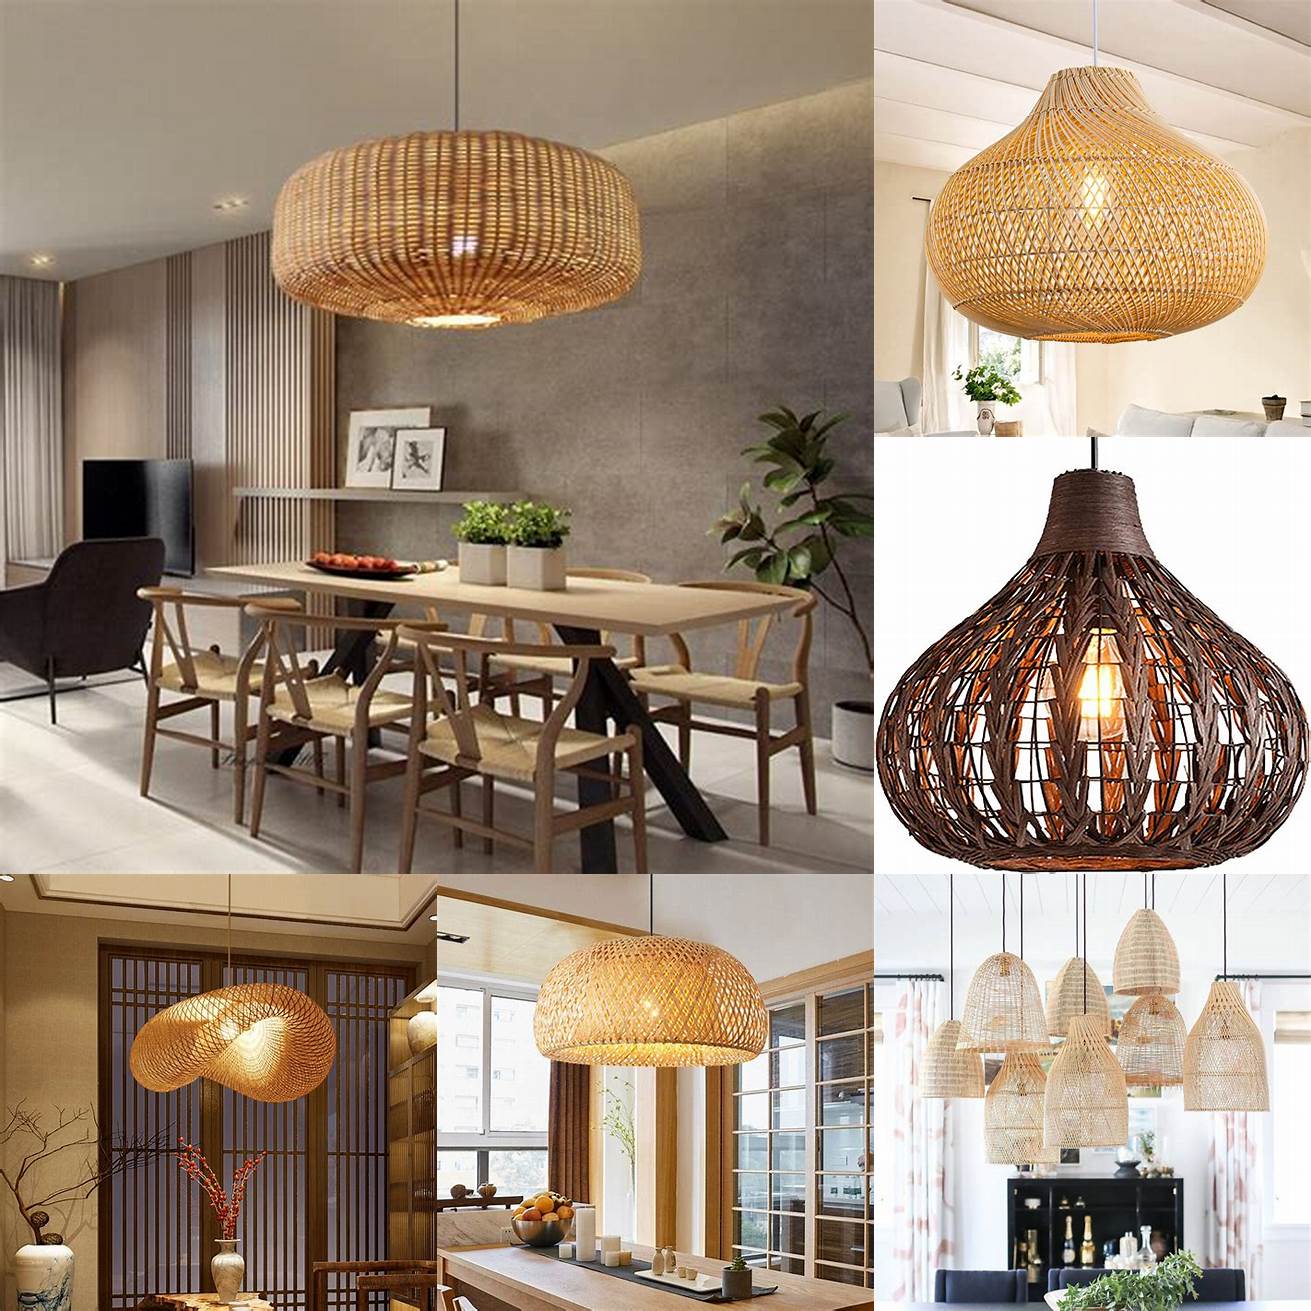 In the living room Hang a large pendant light with a woven or rattan shade above the seating area for a cozy and organic feel